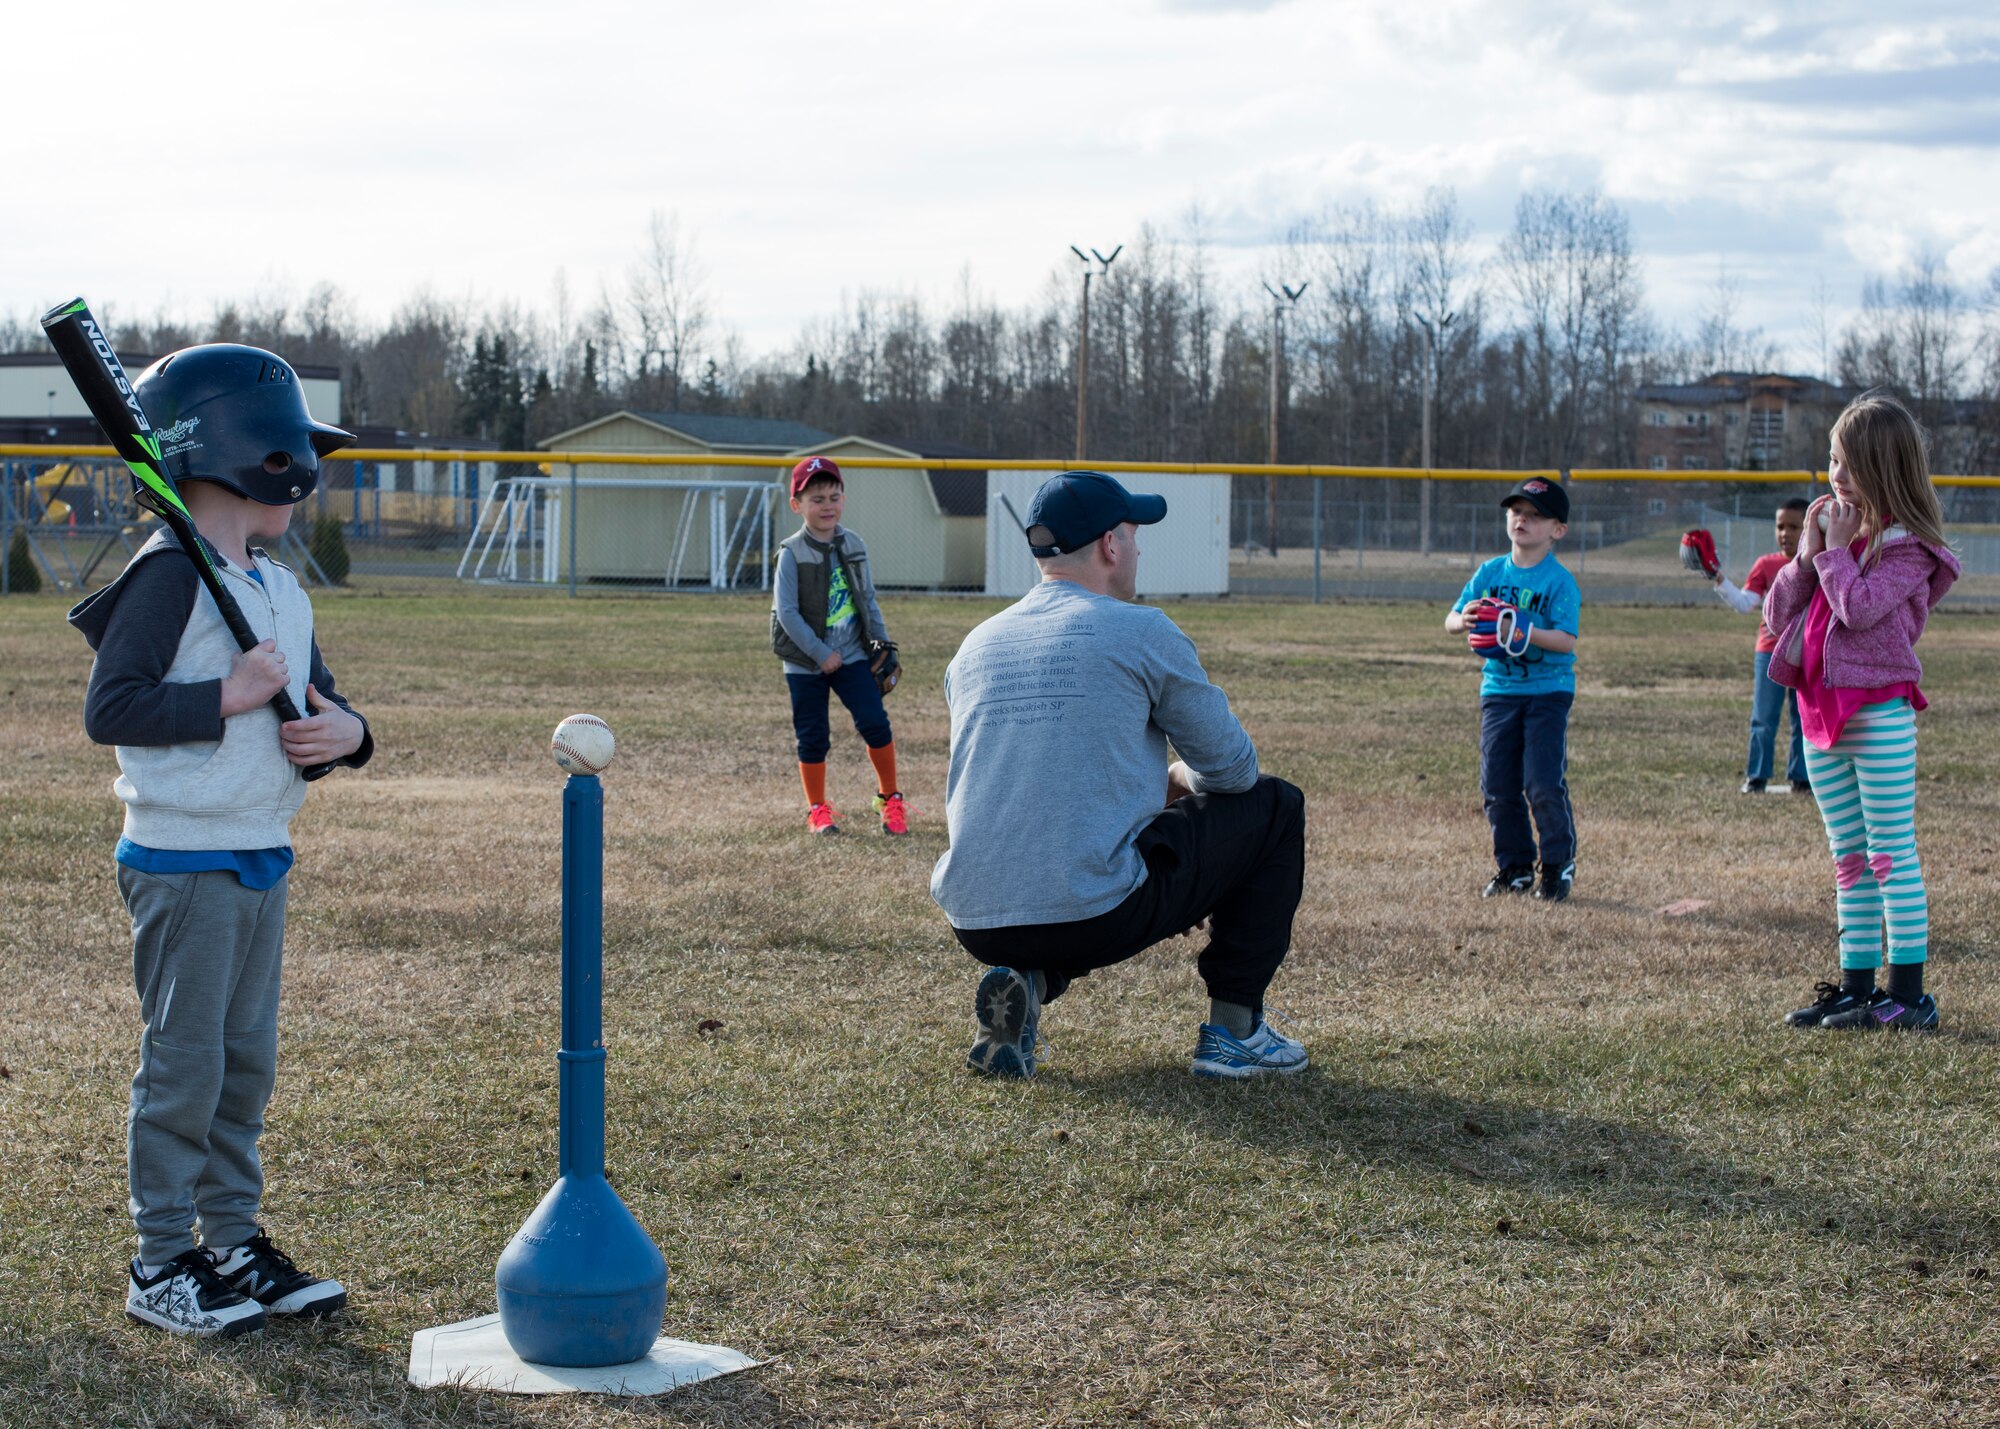 Children registered for the 2018 Youth Sports Program Little League season listen to coaching while learning about playing outfield positions at Joint Base Elmendorf-Richardson, Alaska, May 7, 2018. JBER YSP abides by the National Alliance for Youth Sports-affiliated National Youth Sports Coaches Association, which provides education on topics such as the psychology of coaching youth sports, communication, child abuse, injury prevention, and nutrition and hydration, as well as skills and drills specifically applicable to each sport.